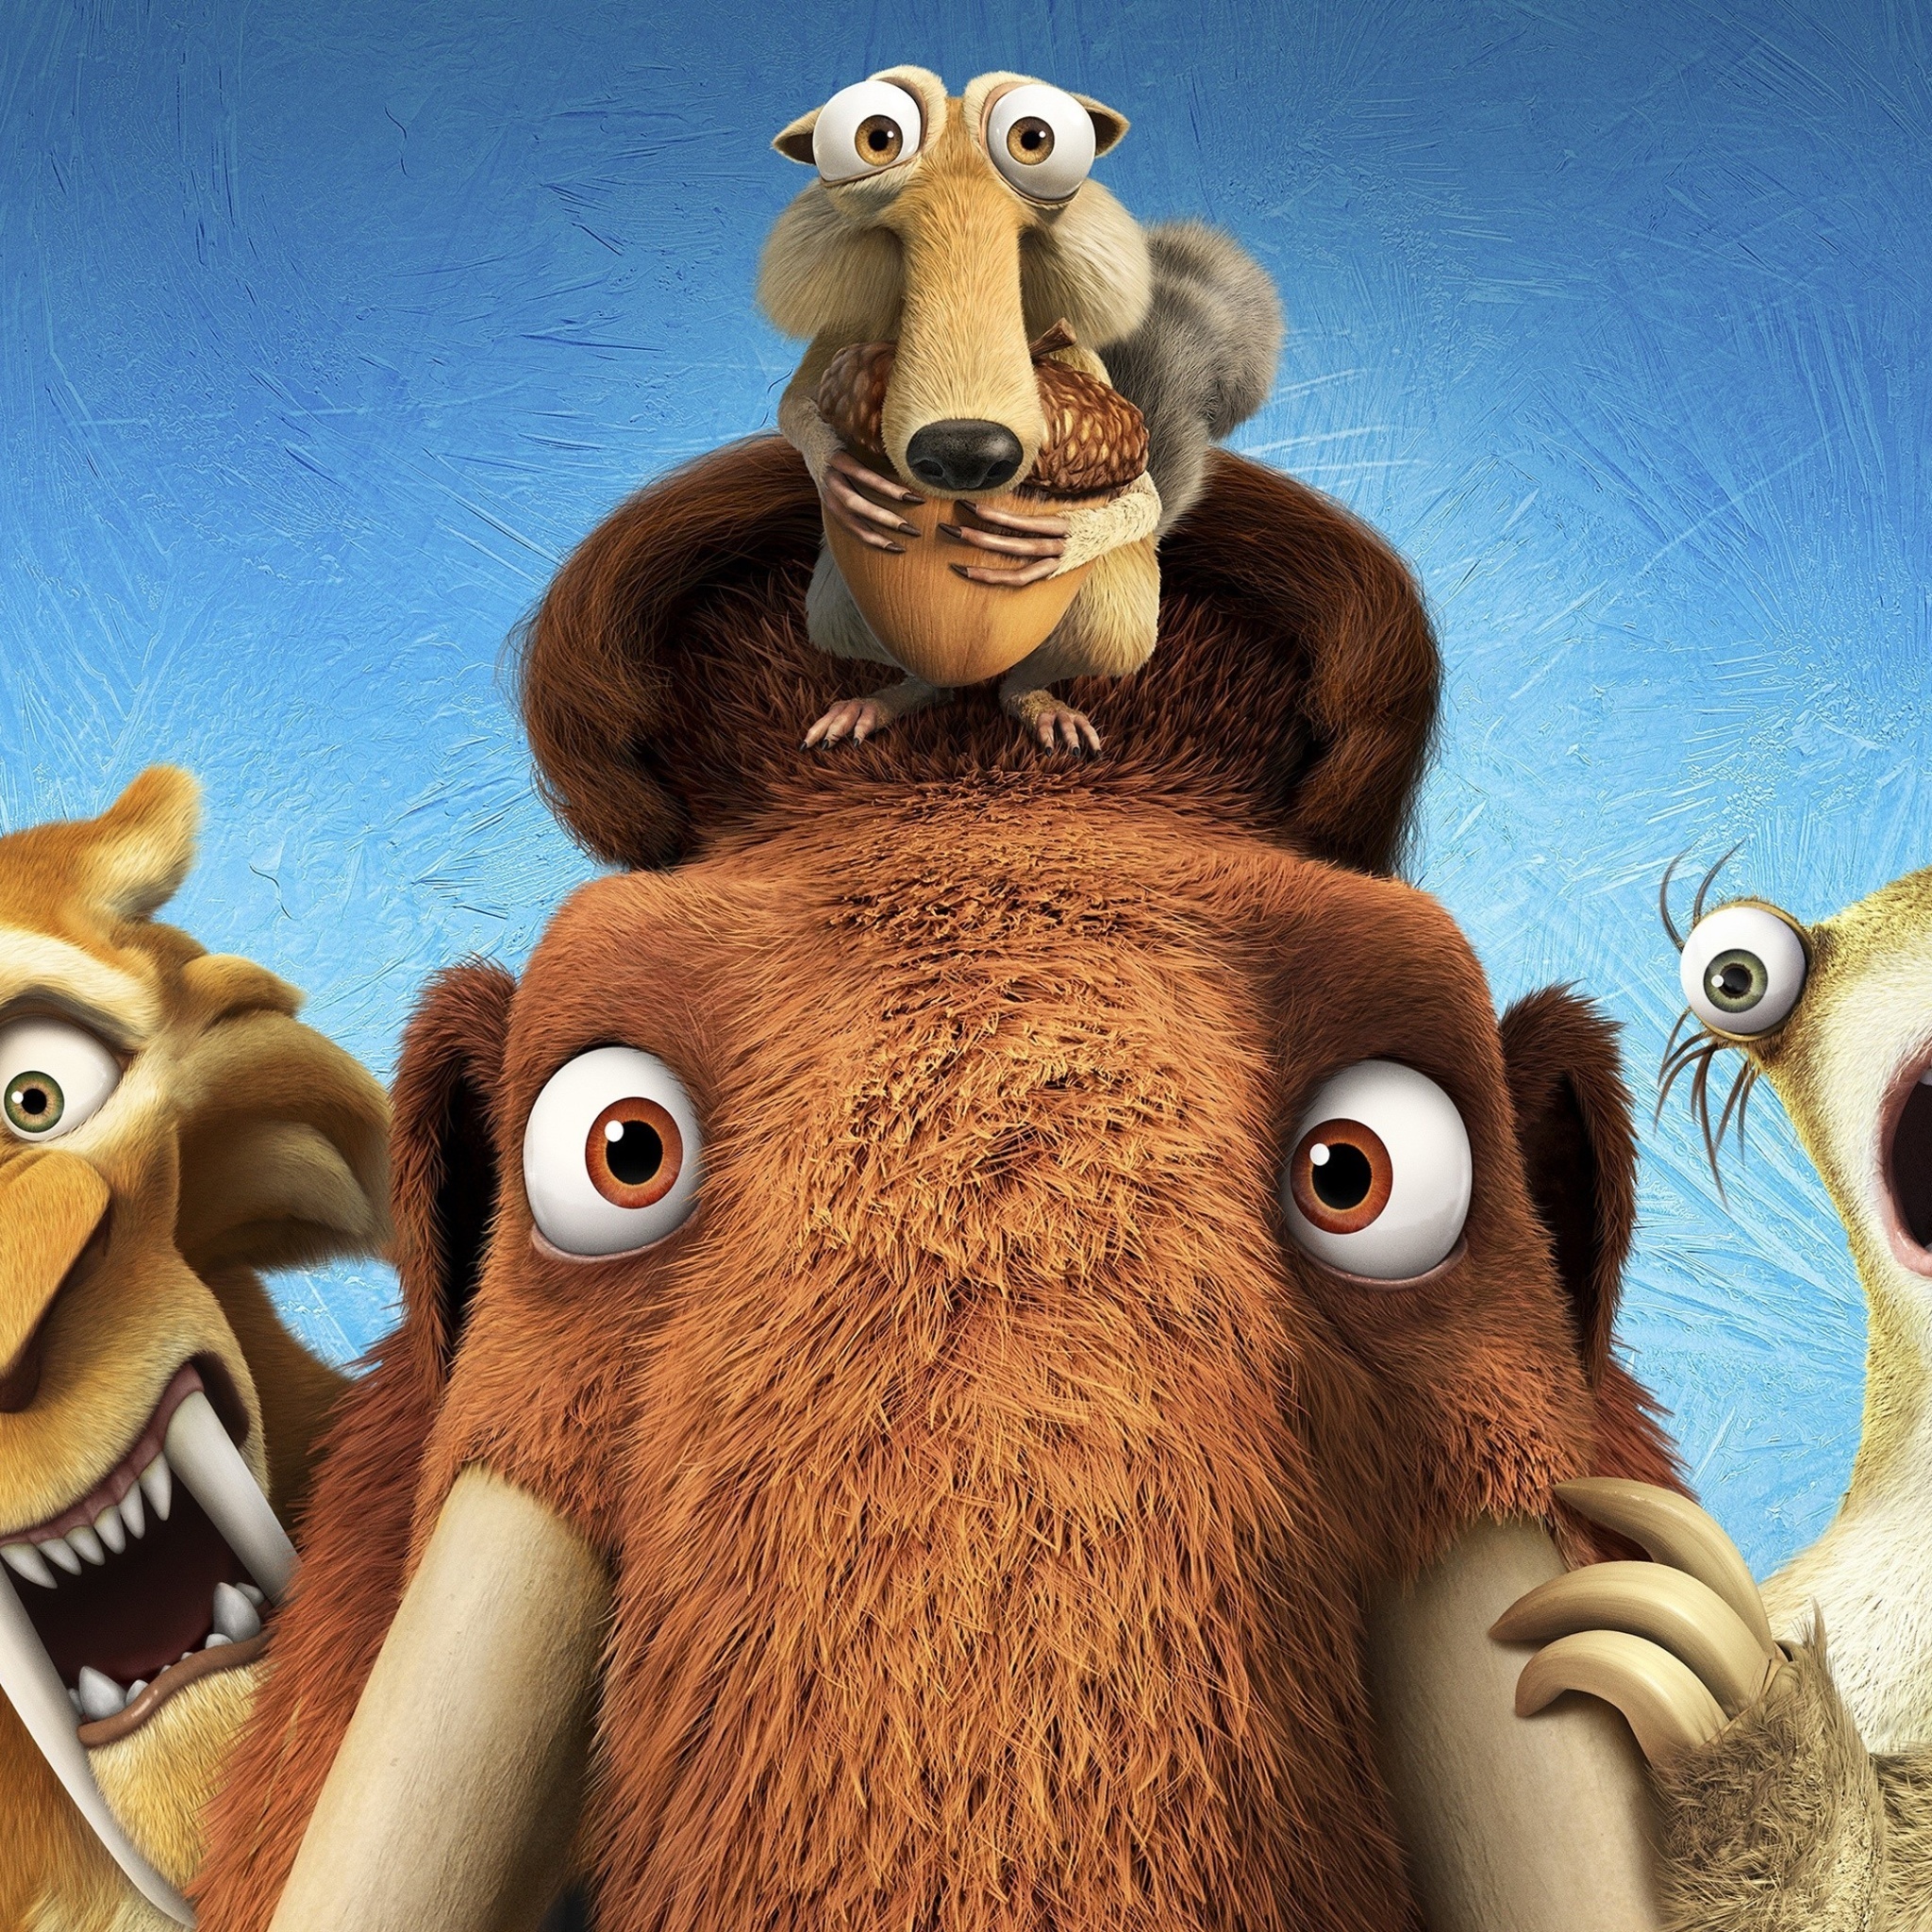 Ice Age 5 Collision Course with Diego, Manny, Scrat, Sid, Mammoths screenshot #1 2048x2048